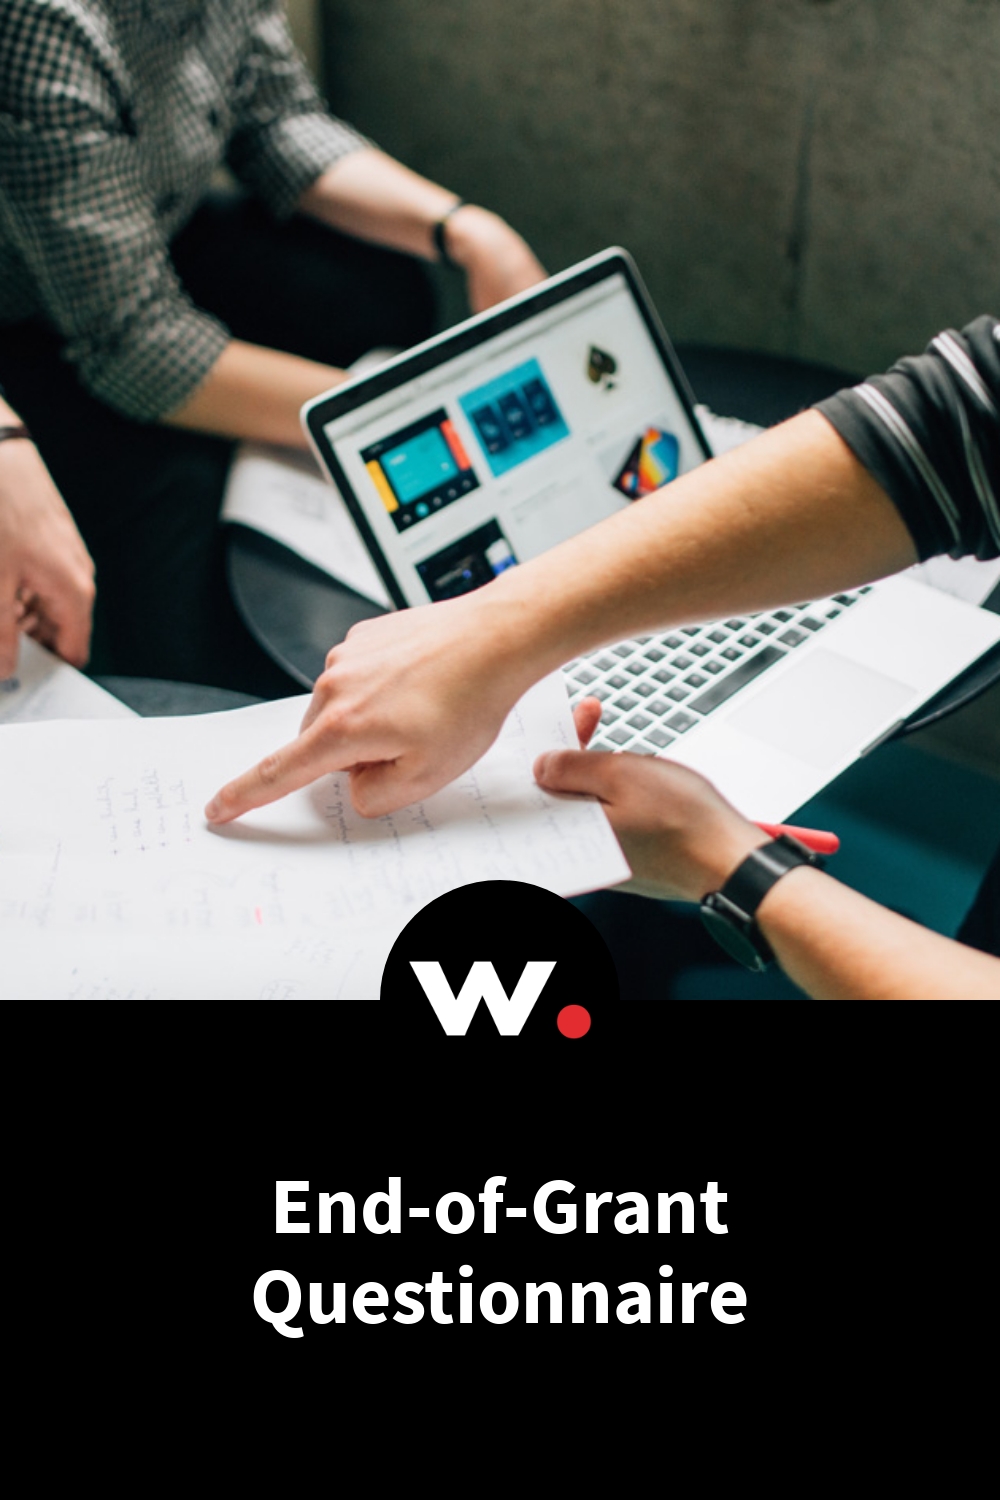 End-of-Grant Questionnaire